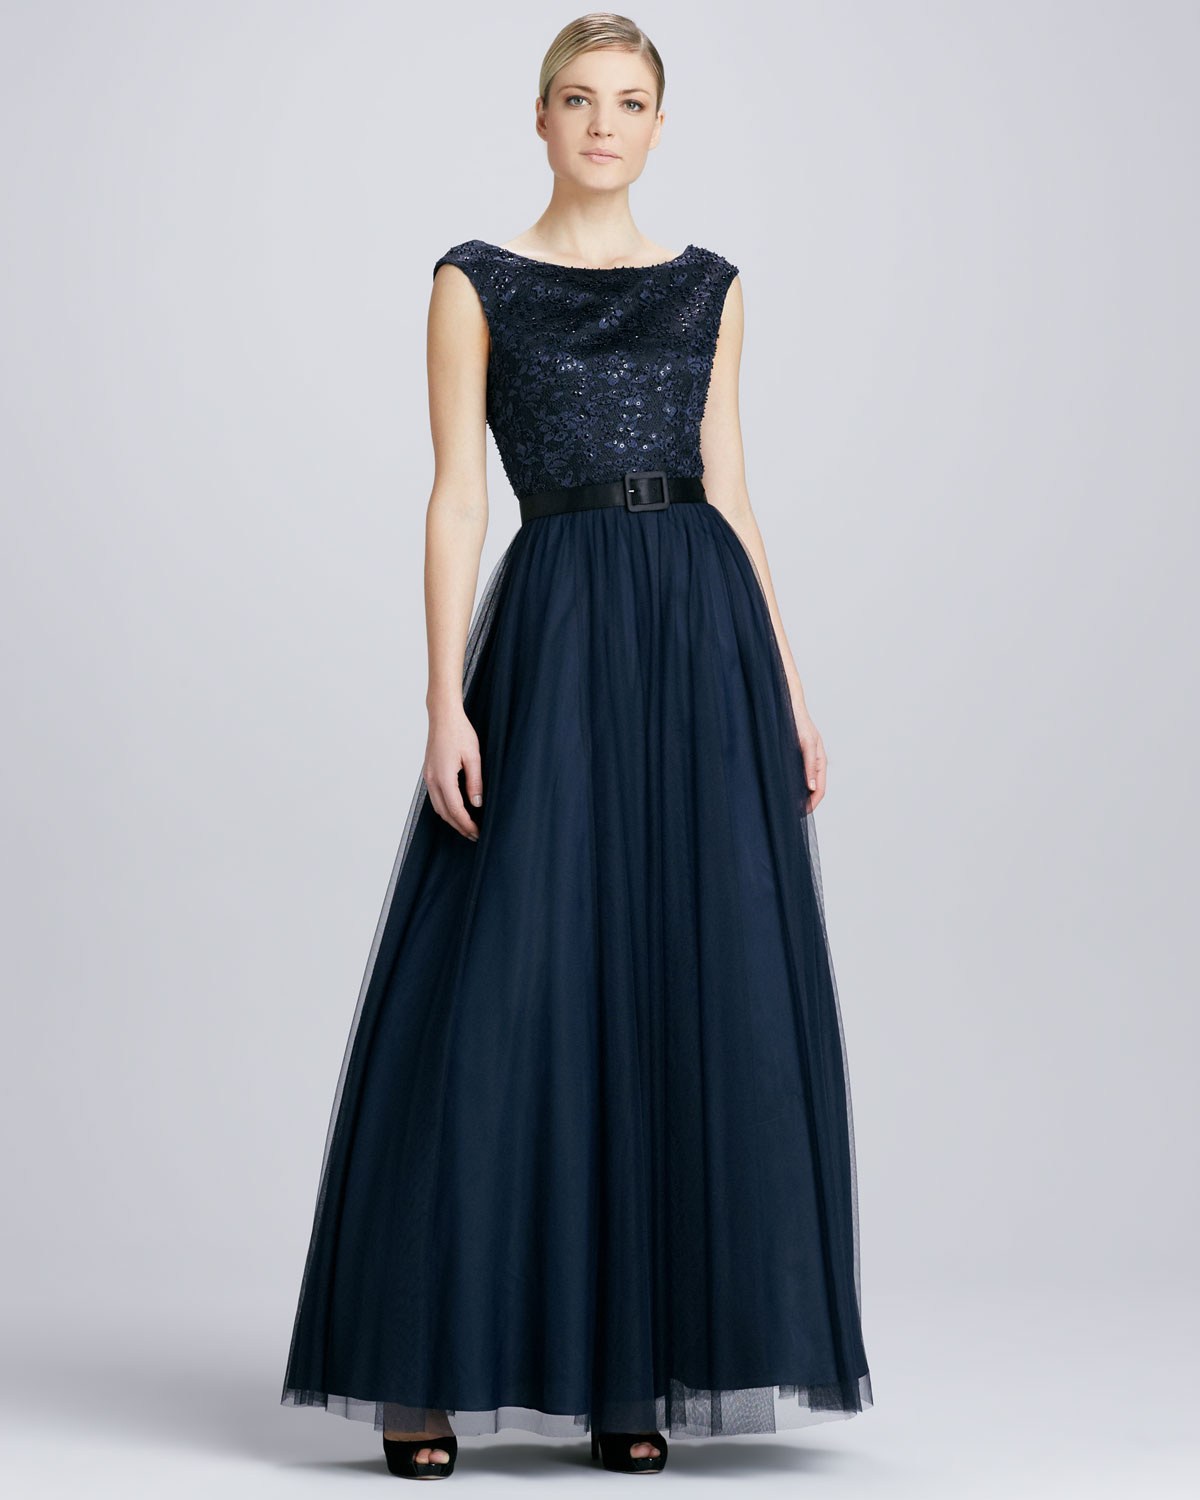 Lyst - Aidan Mattox Lace Beaded Belted Tulle Gown in Blue